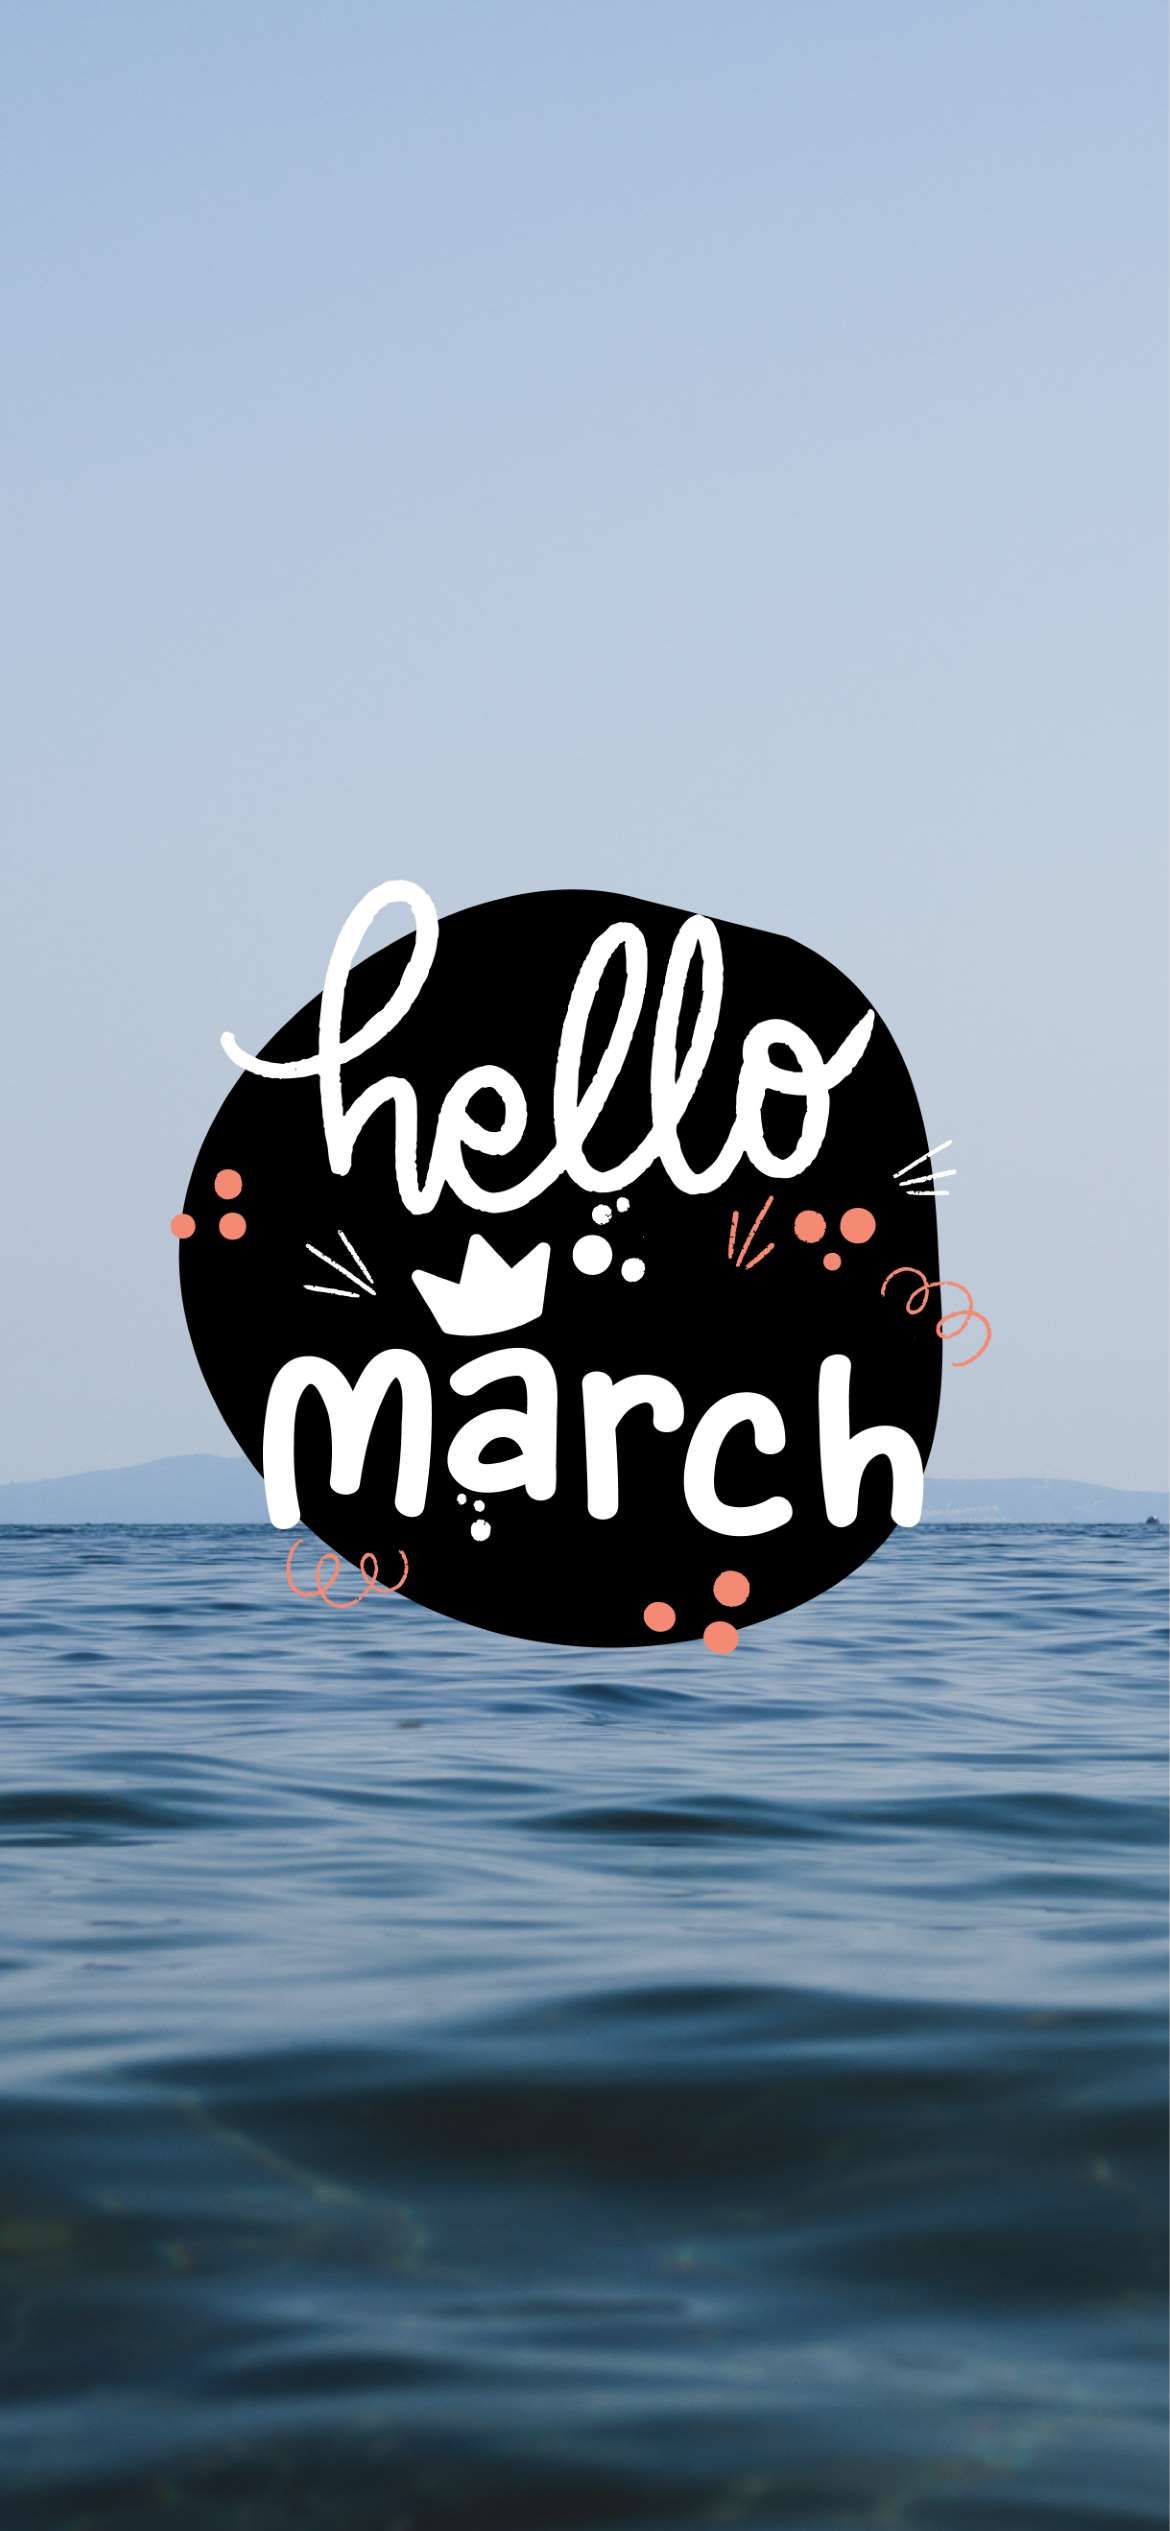 Hello March wallpaper for your phone. - March